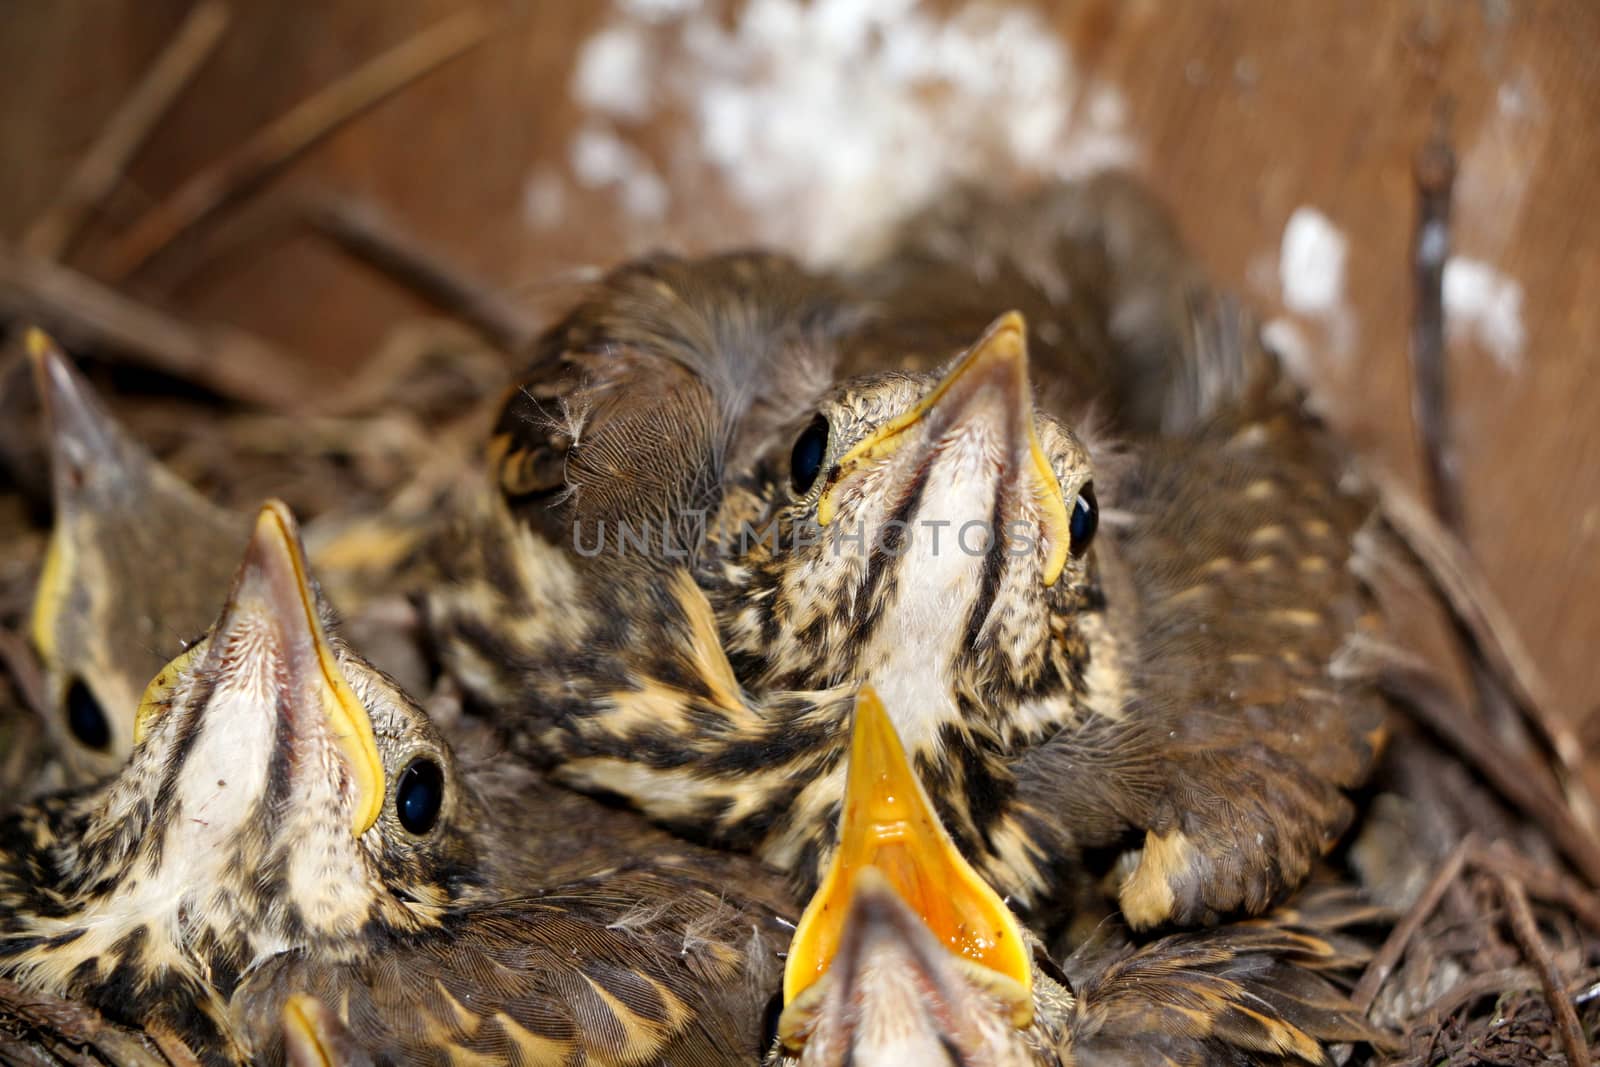 Little baby birds sitting in the nest, close-up photography of n by Sylverarts